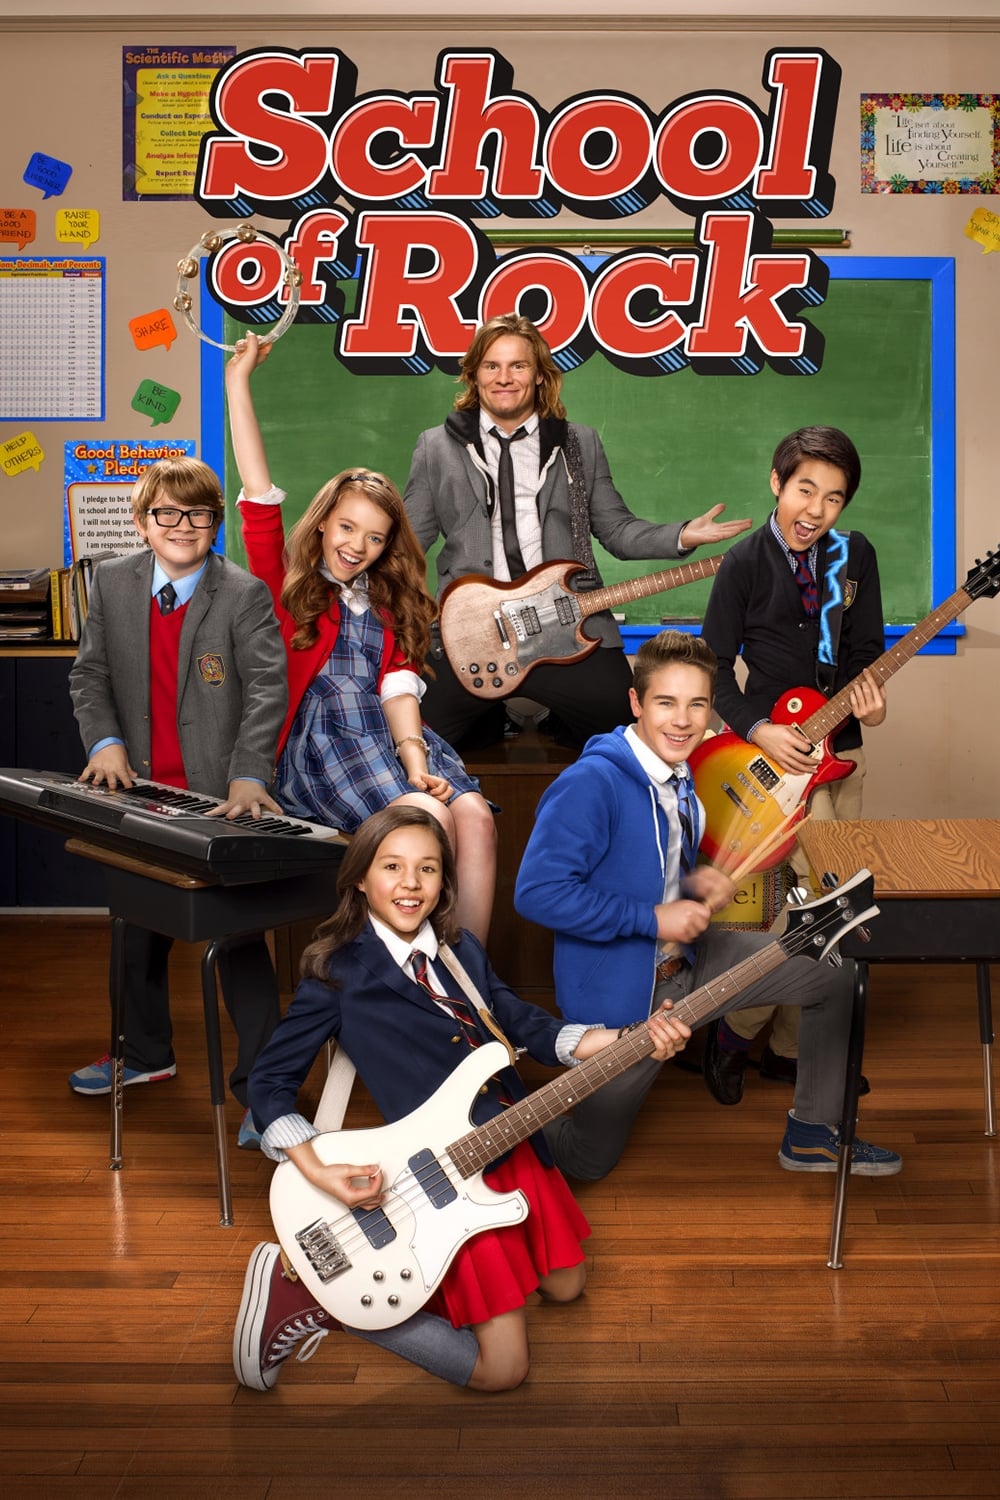 School of Rock TV Shows About Rock Band